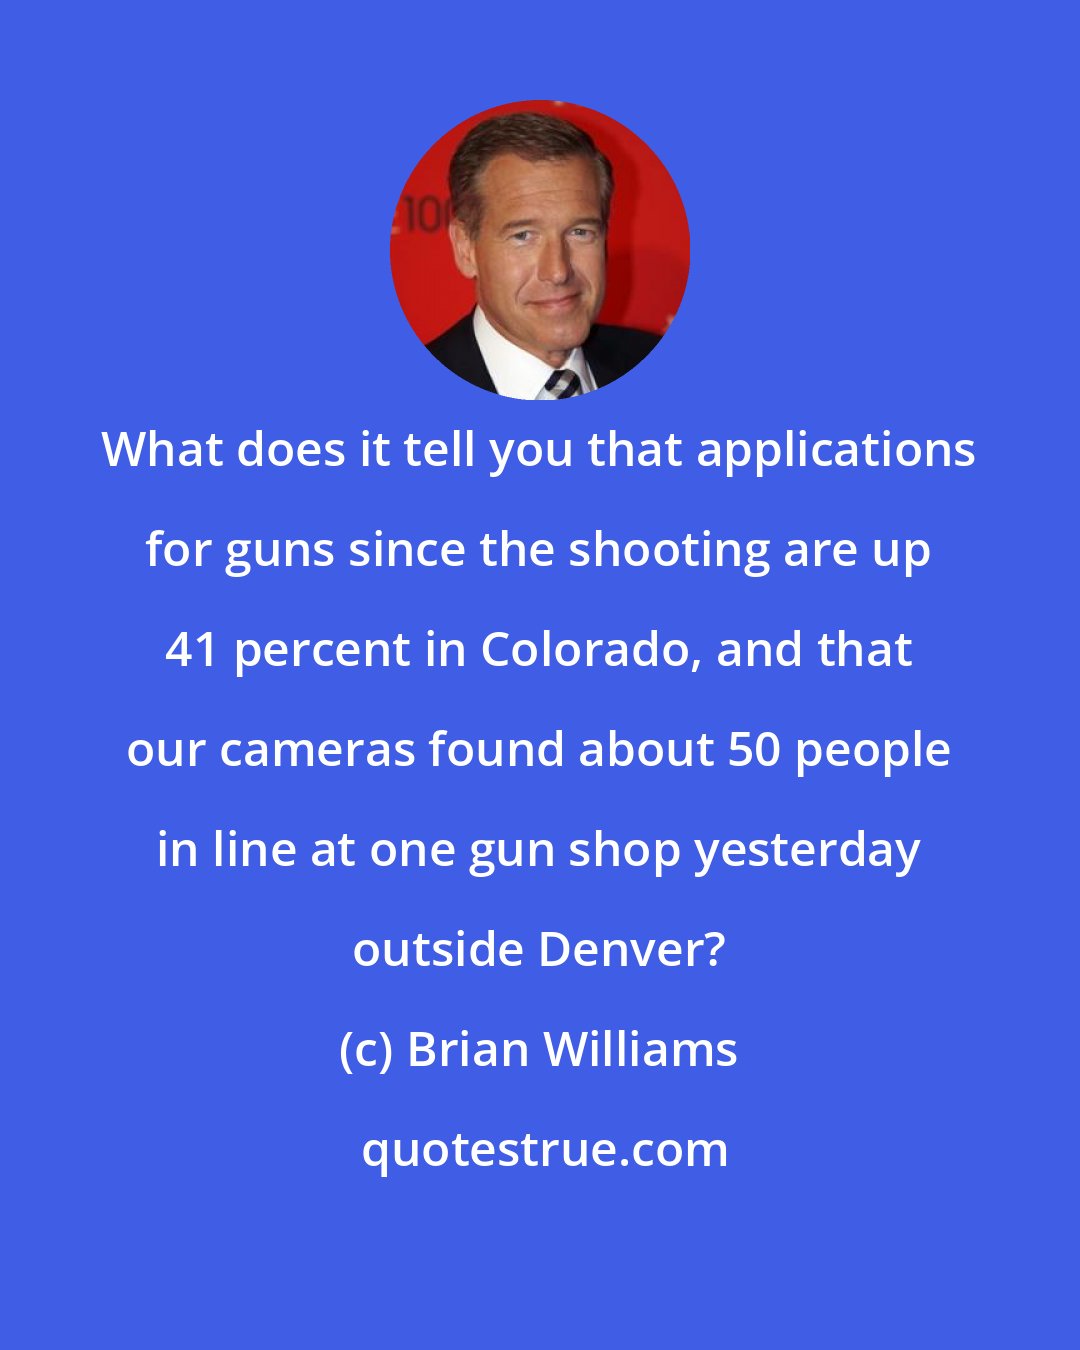 Brian Williams: What does it tell you that applications for guns since the shooting are up 41 percent in Colorado, and that our cameras found about 50 people in line at one gun shop yesterday outside Denver?